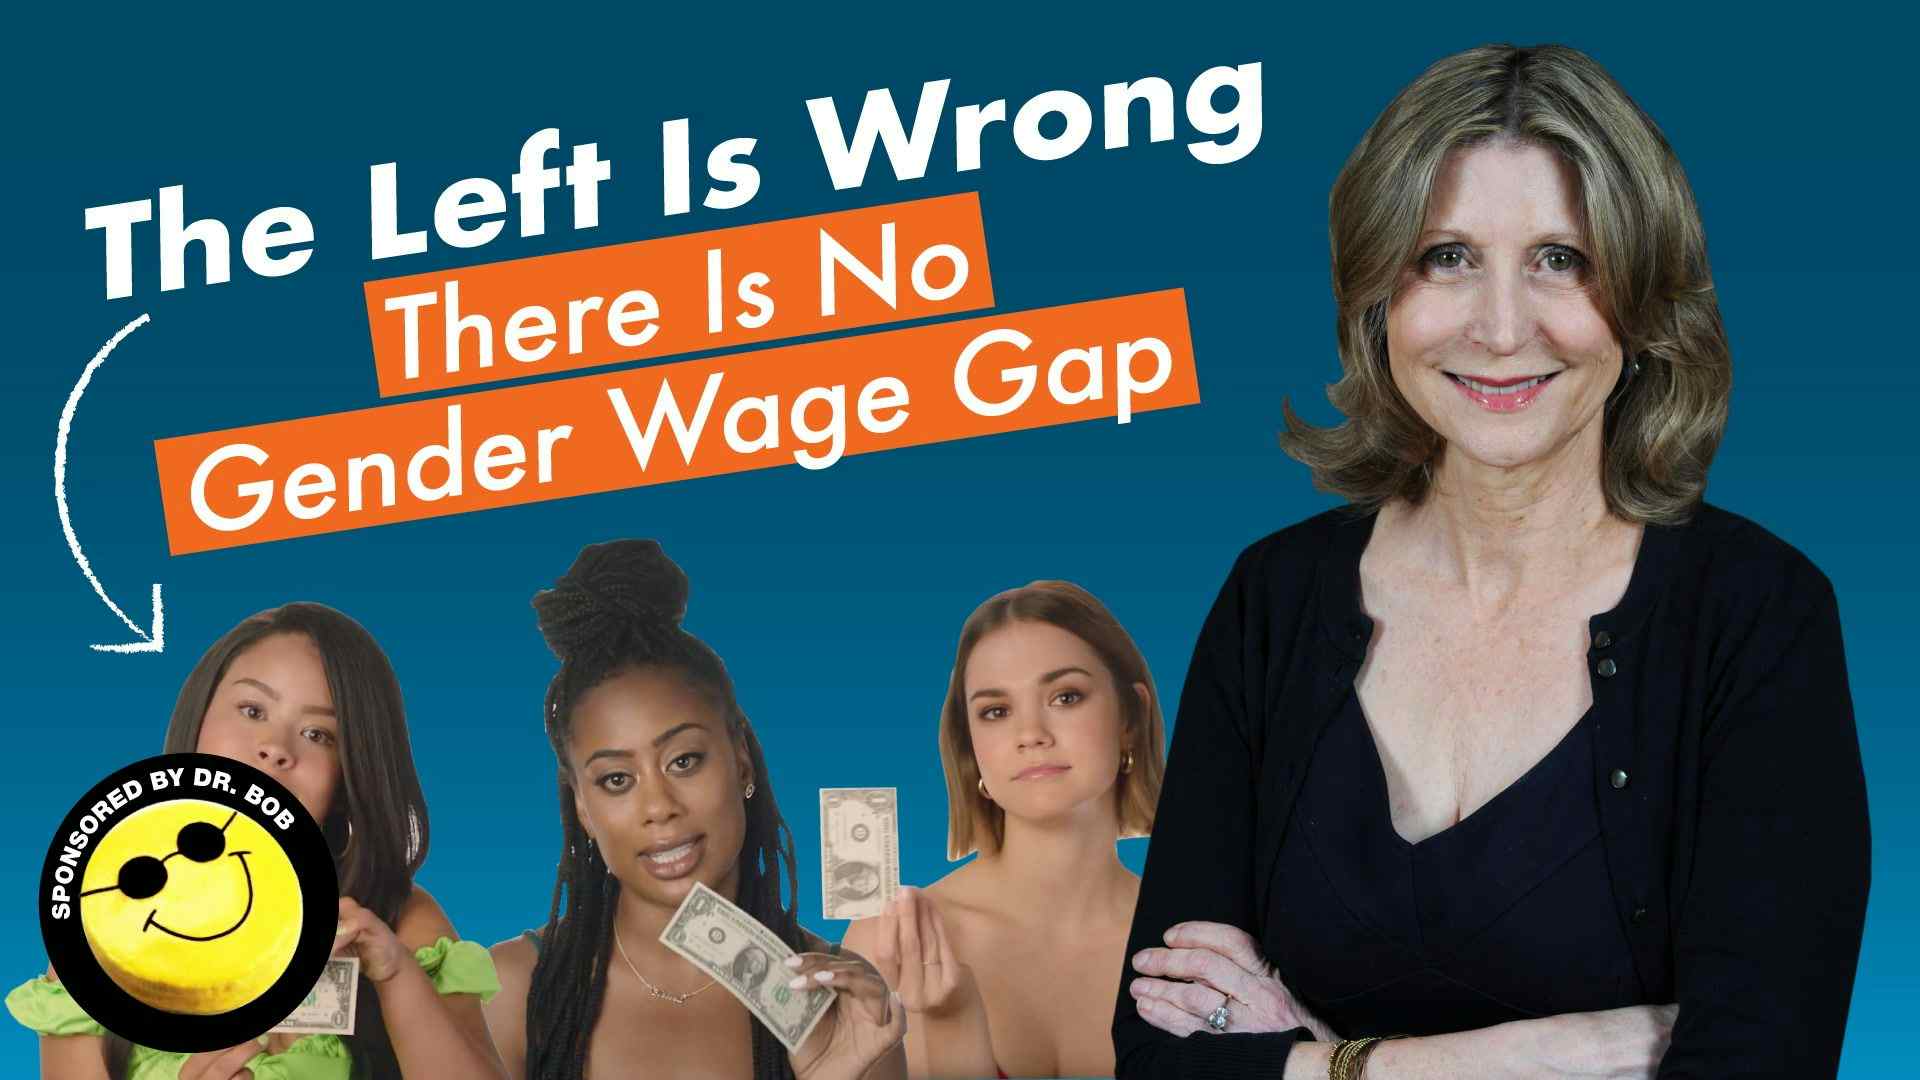 The Left is Wrong. There is No Gender Wage Gap